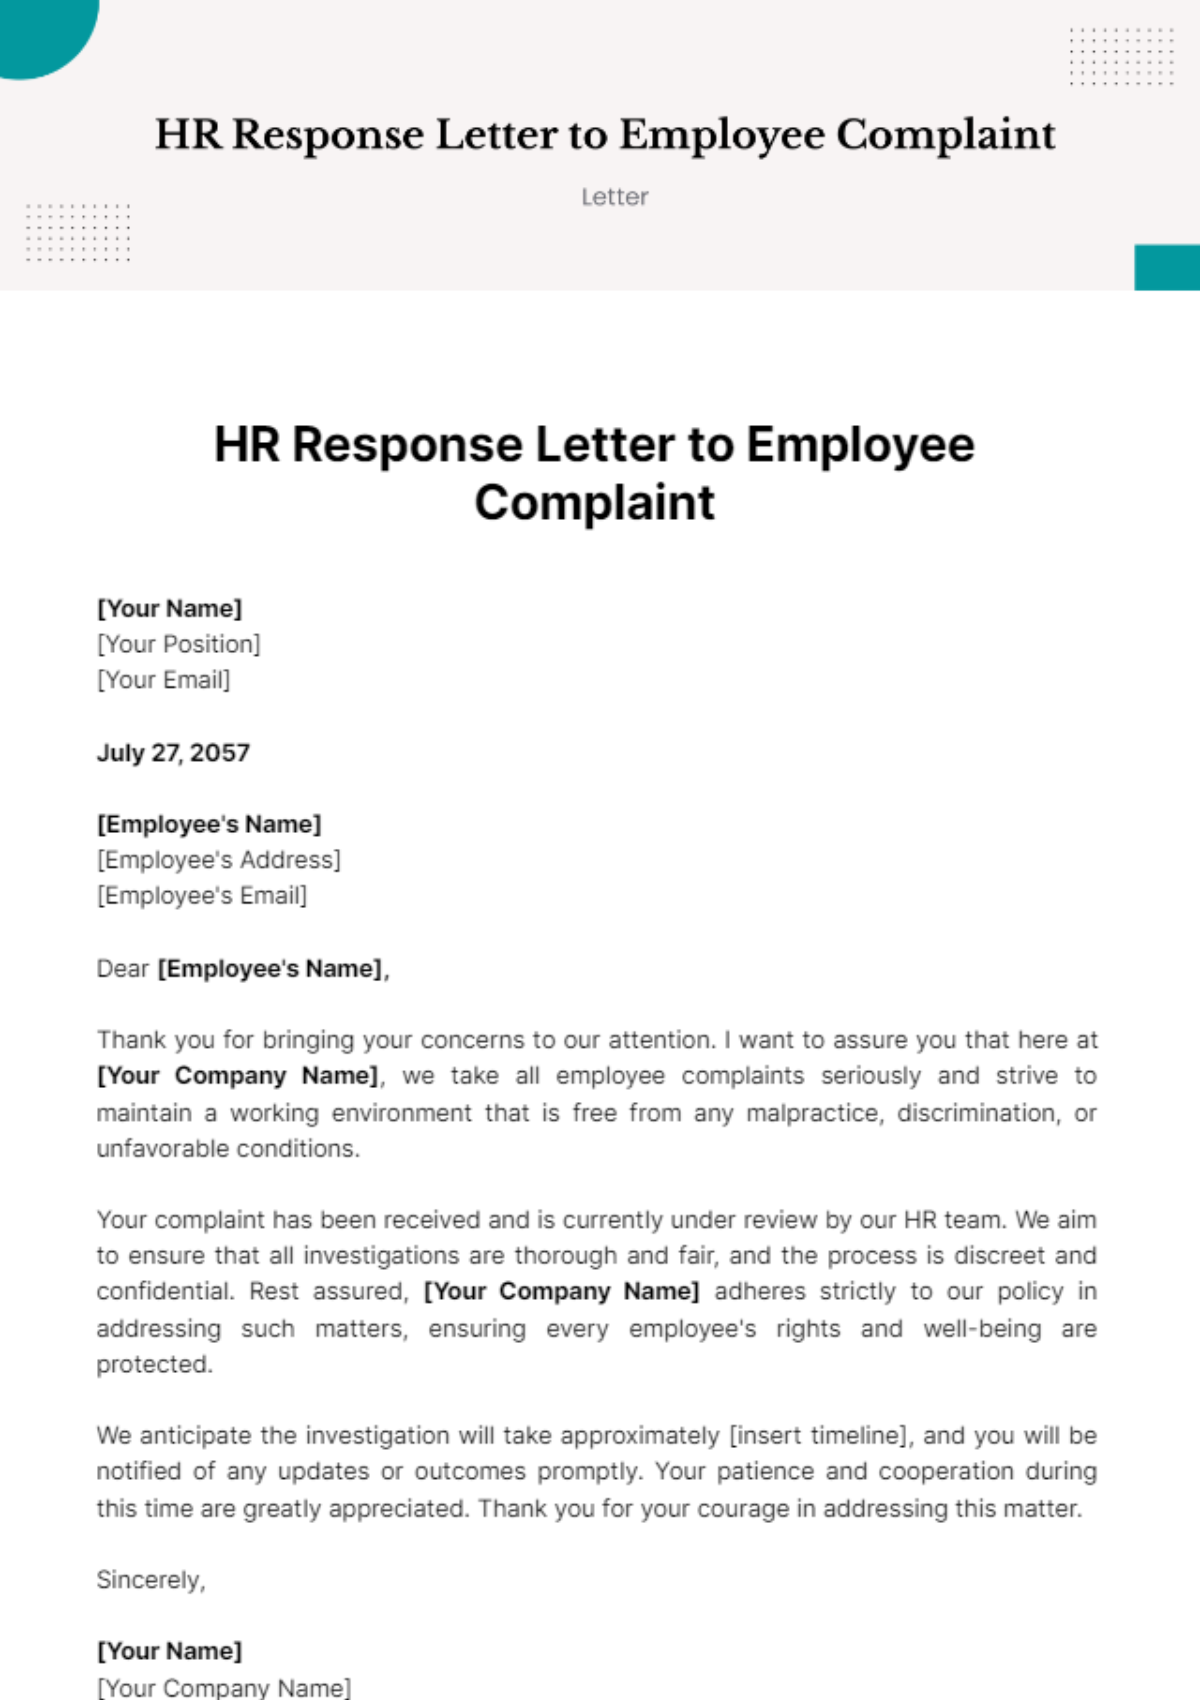 Free HR Response Letter to Employee Complaint Template